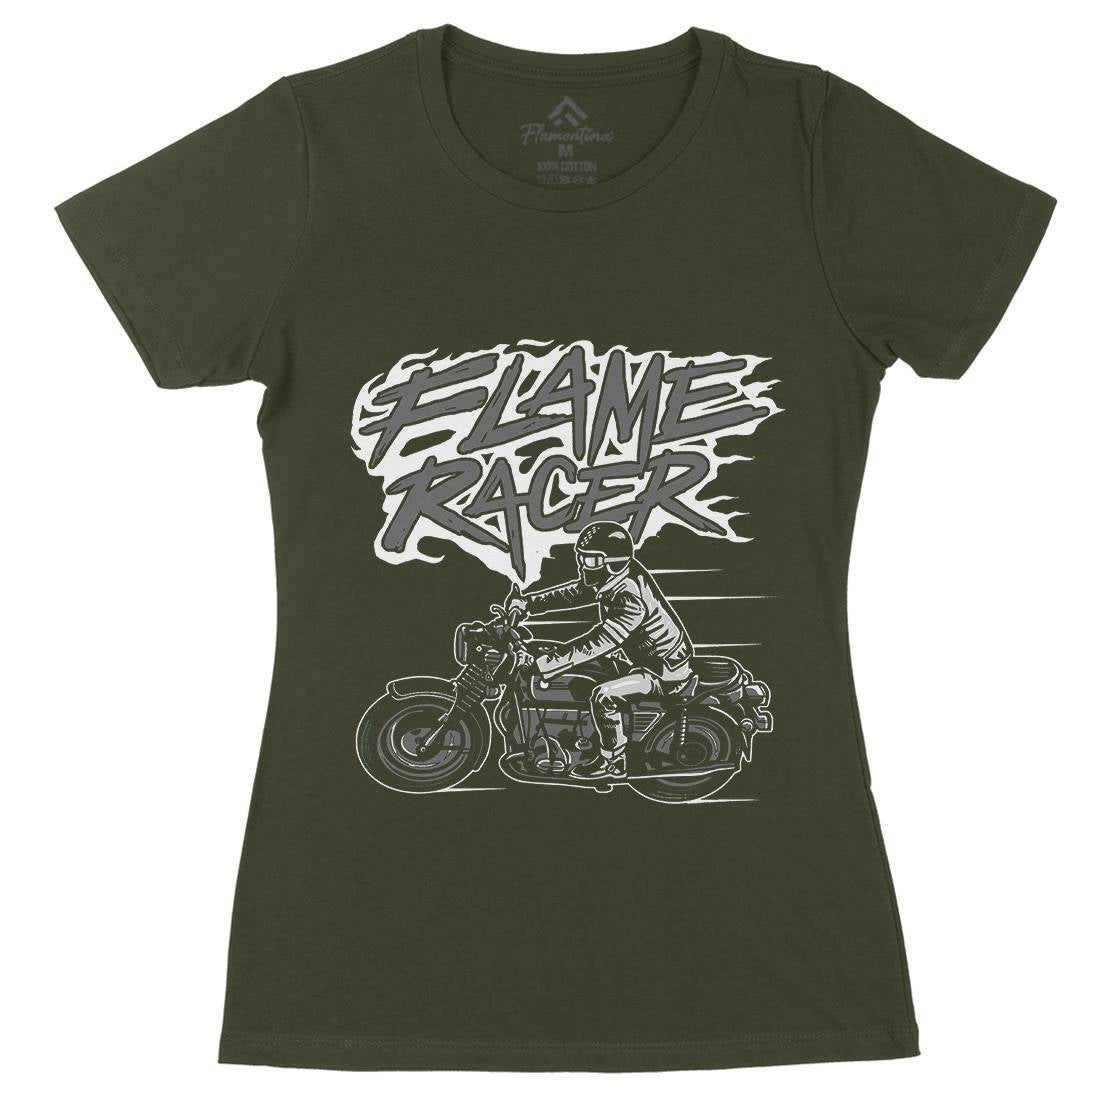 Flame Racer Womens Organic Crew Neck T-Shirt Motorcycles A530